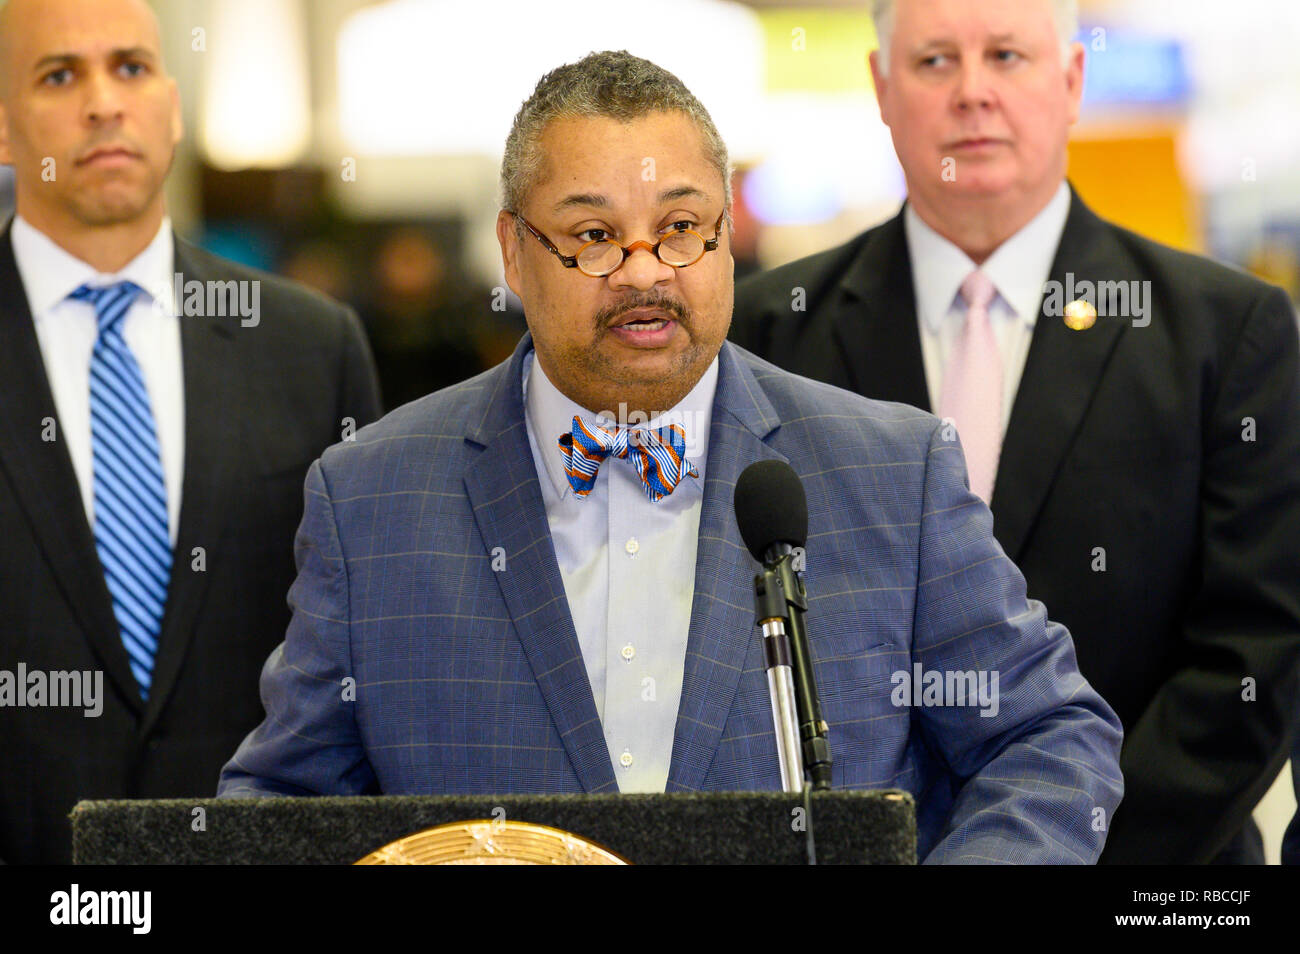 U.S. Representative Donald Payne, Jr. (D-NJ) seen speaking at a news conference at Newark Liberty International Airport to demand an end to the partial government shutdown leaving thousands of federal workers in New Jersey without pay and to highlight the impacts of lost services being felt statewide. At Newark Liberty International Airport in Newark, New Jersey. Stock Photo